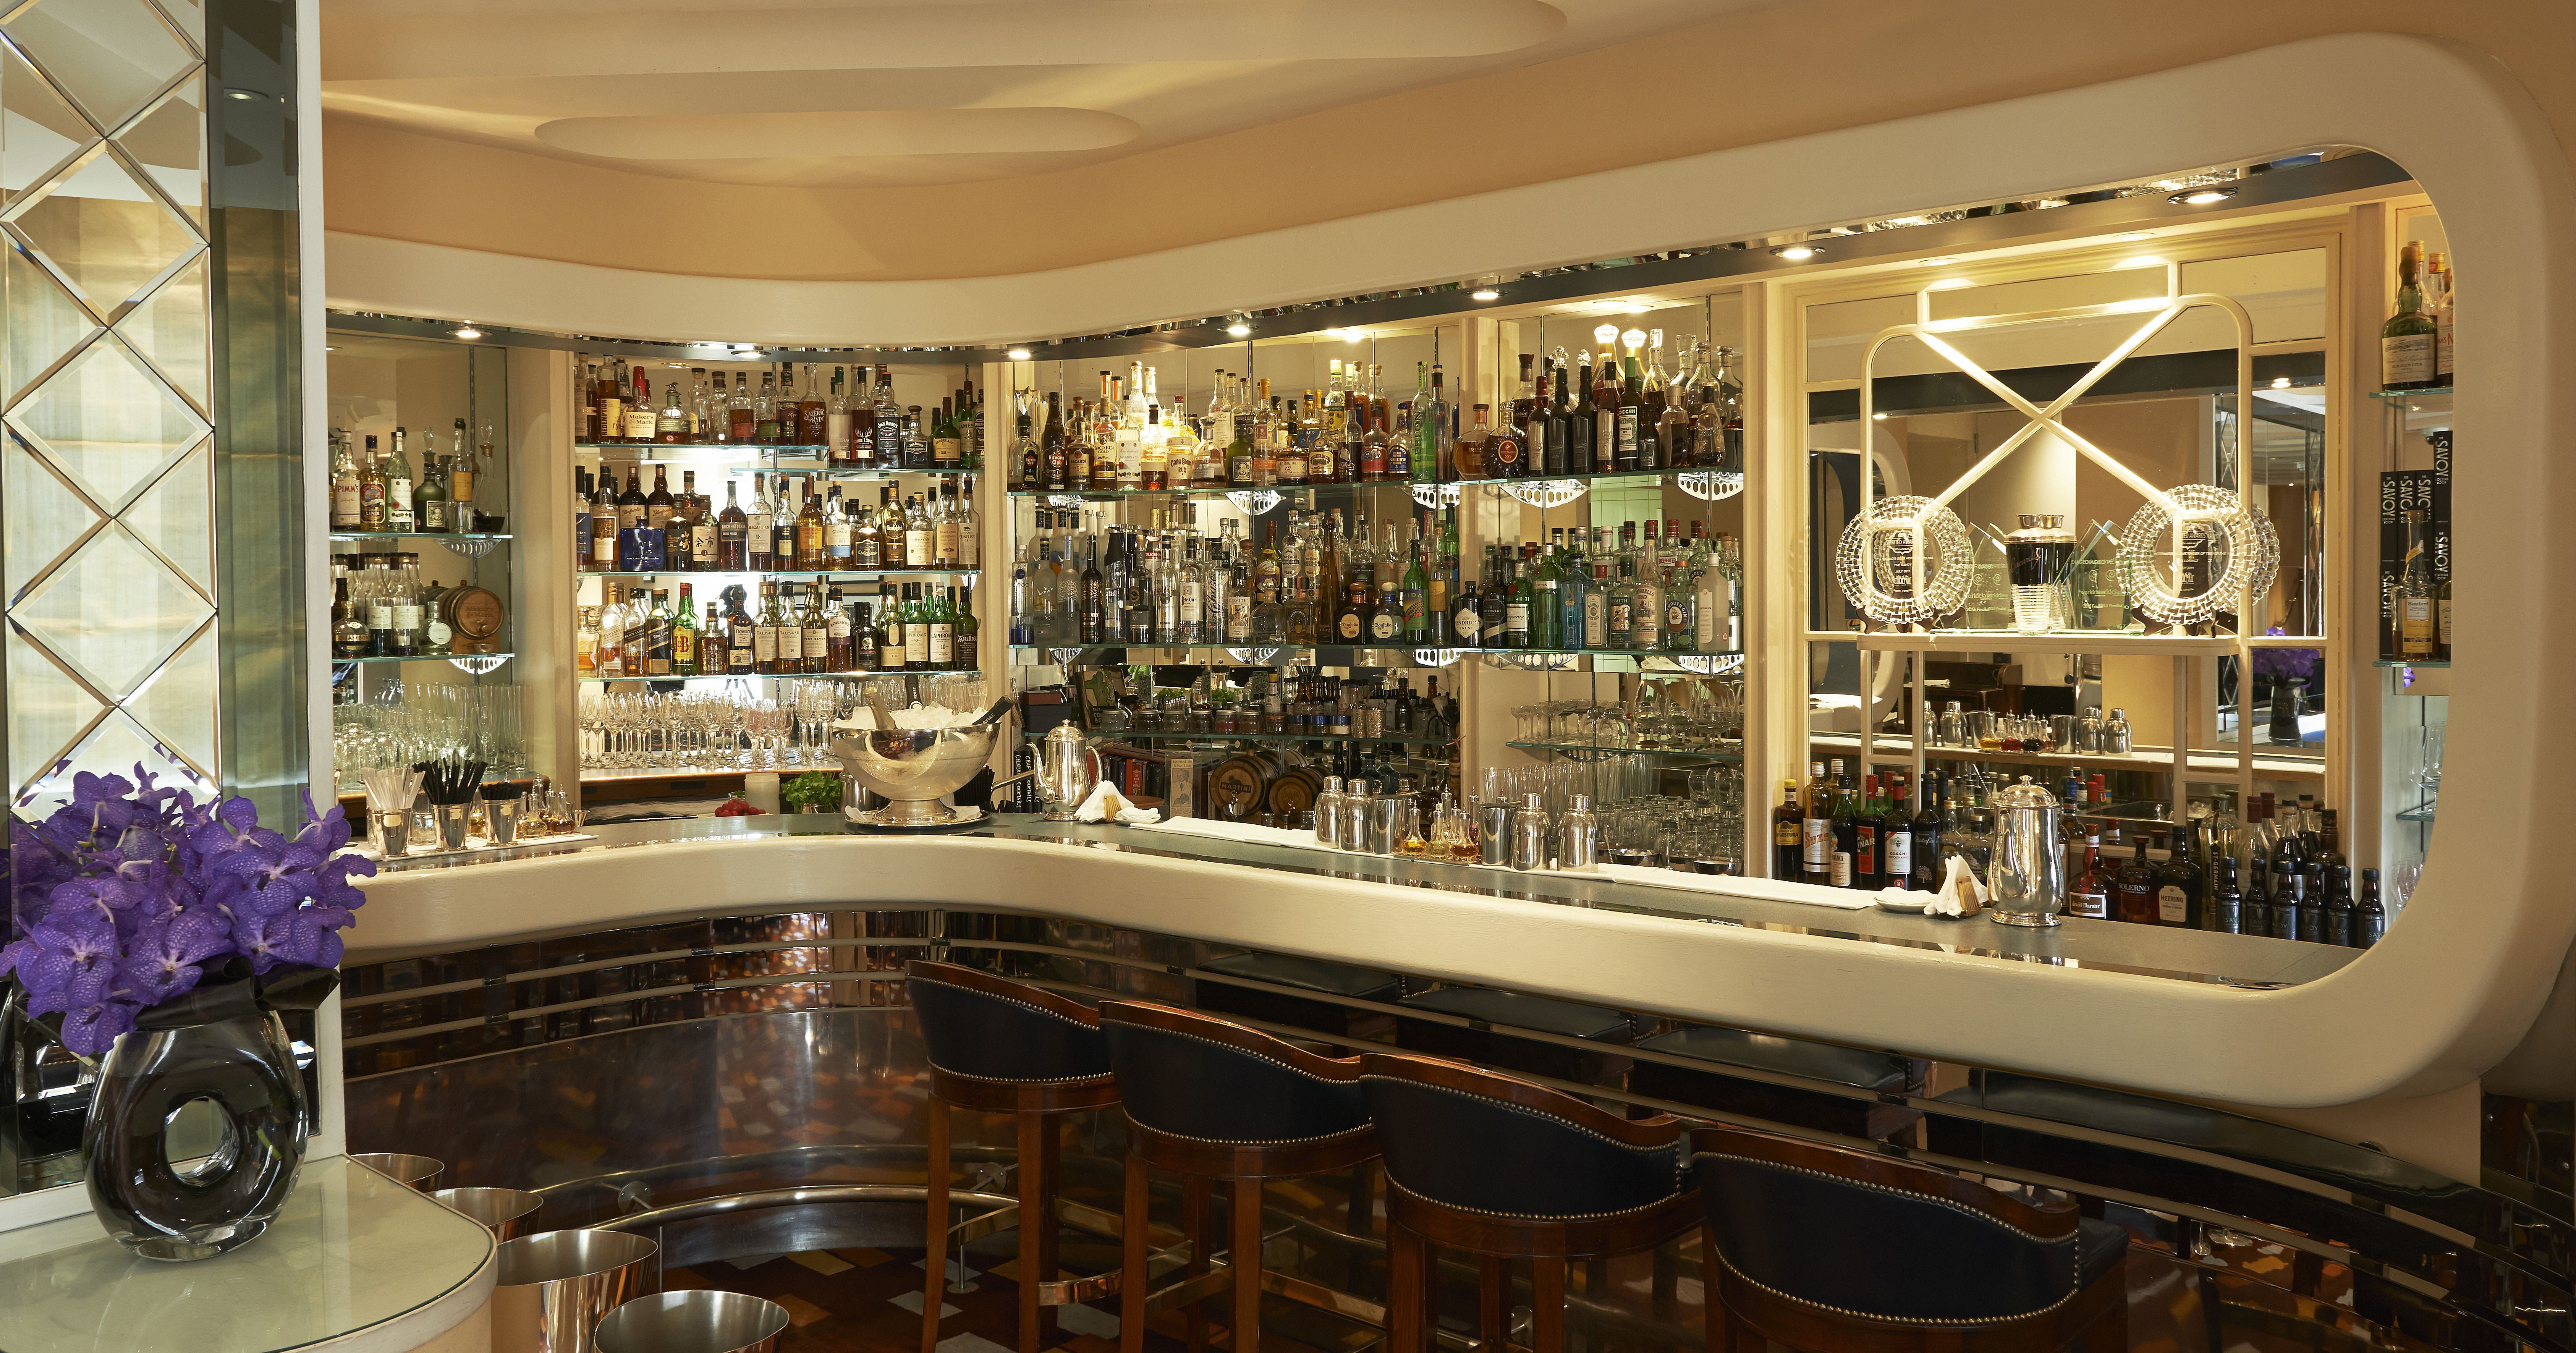 The American Bar at The Savoy – Cocktail bars